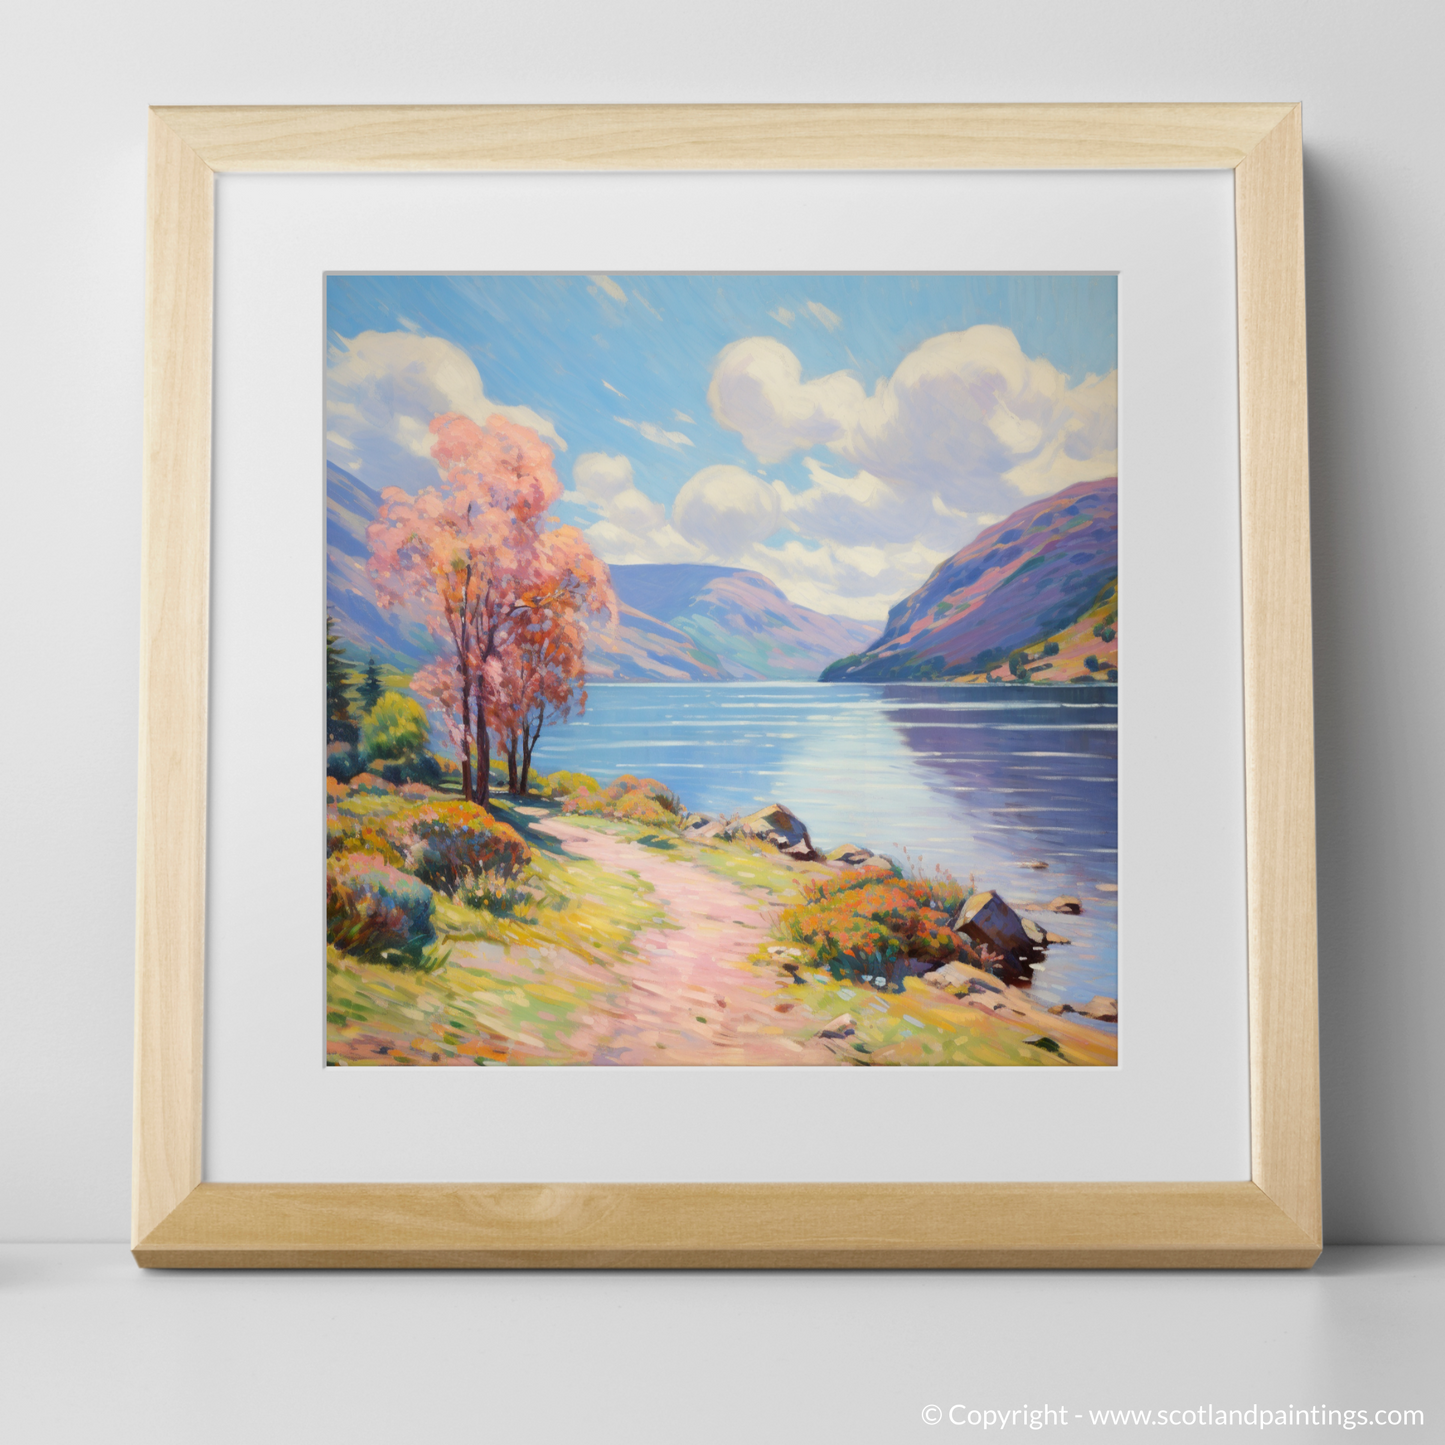 Art Print of Loch Earn, Perth and Kinross in summer with a natural frame